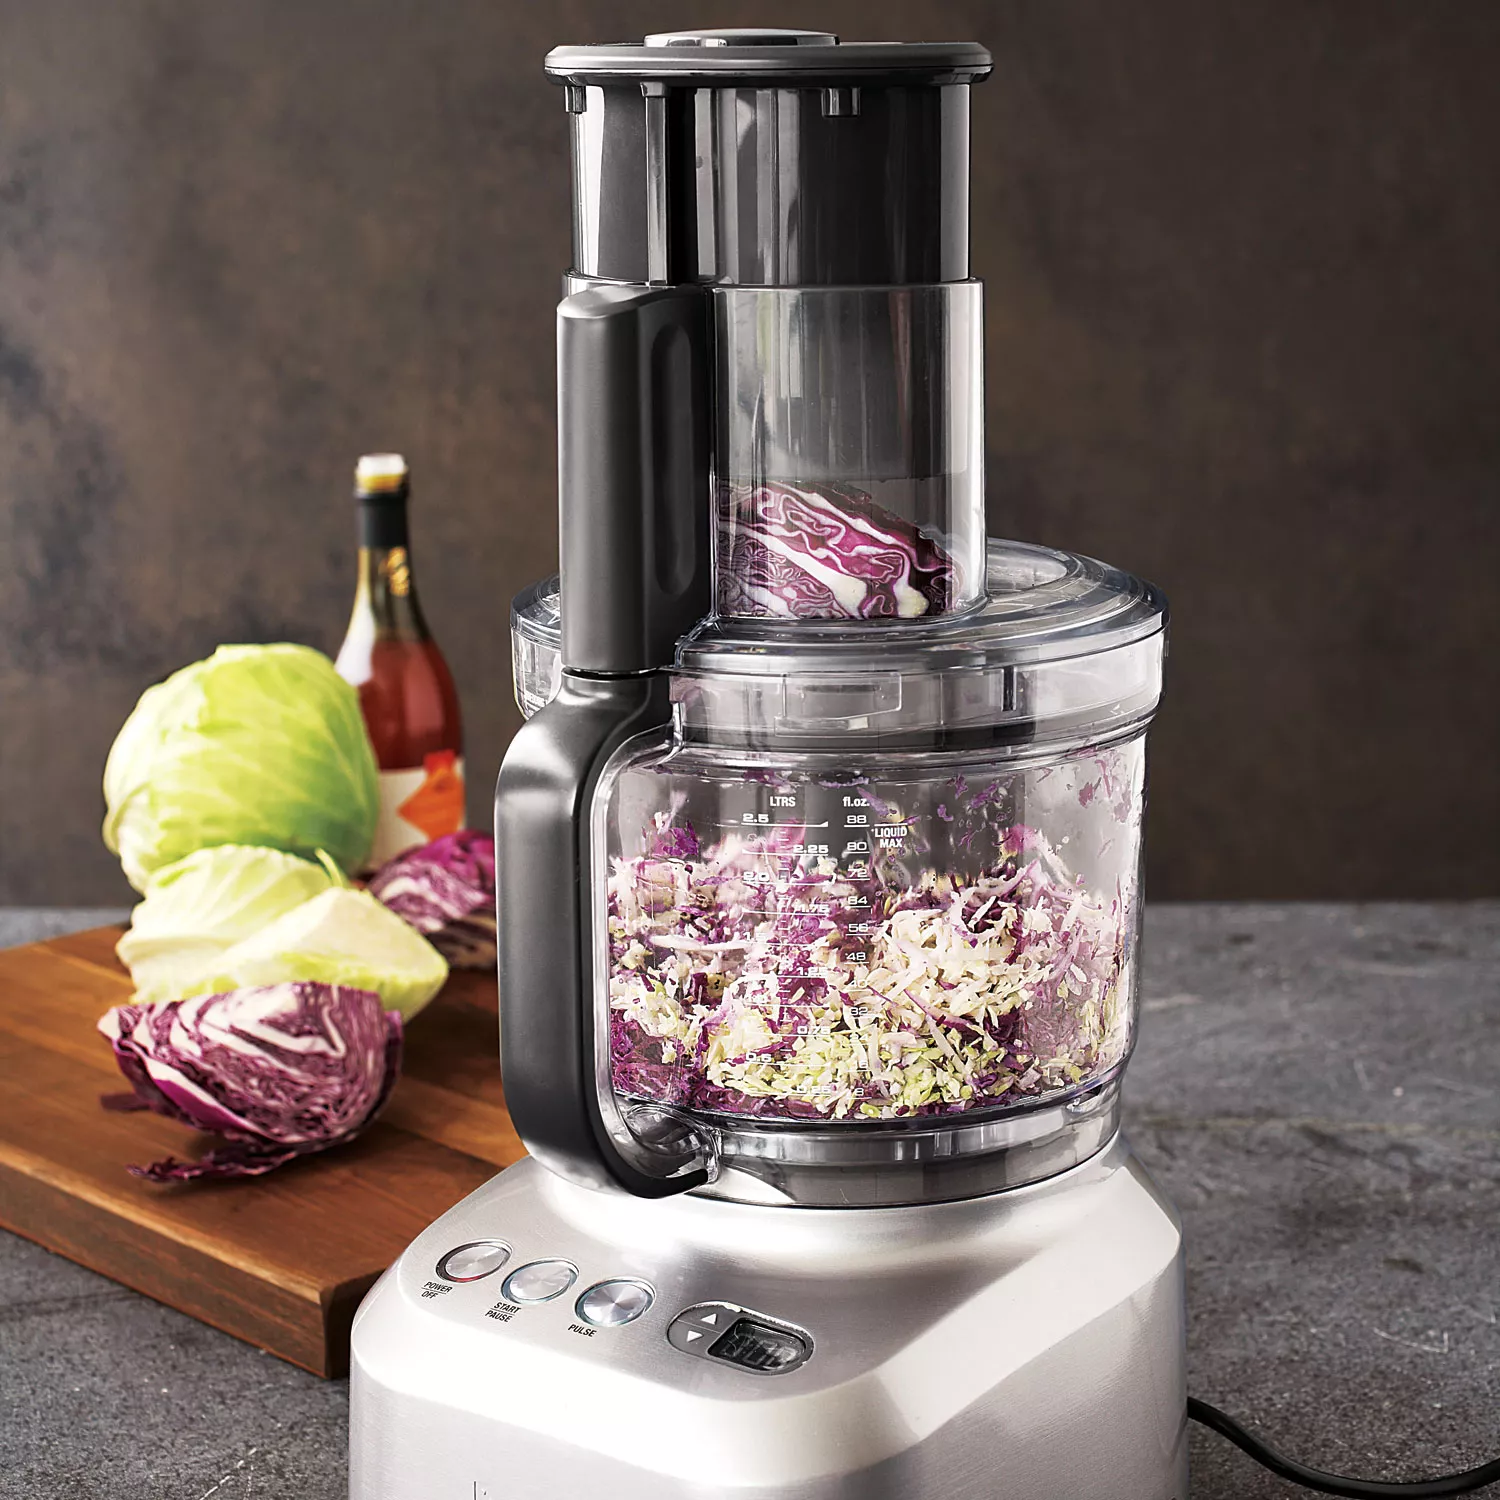 Breville ® Sous Chef ® 12-Cup Food Processor